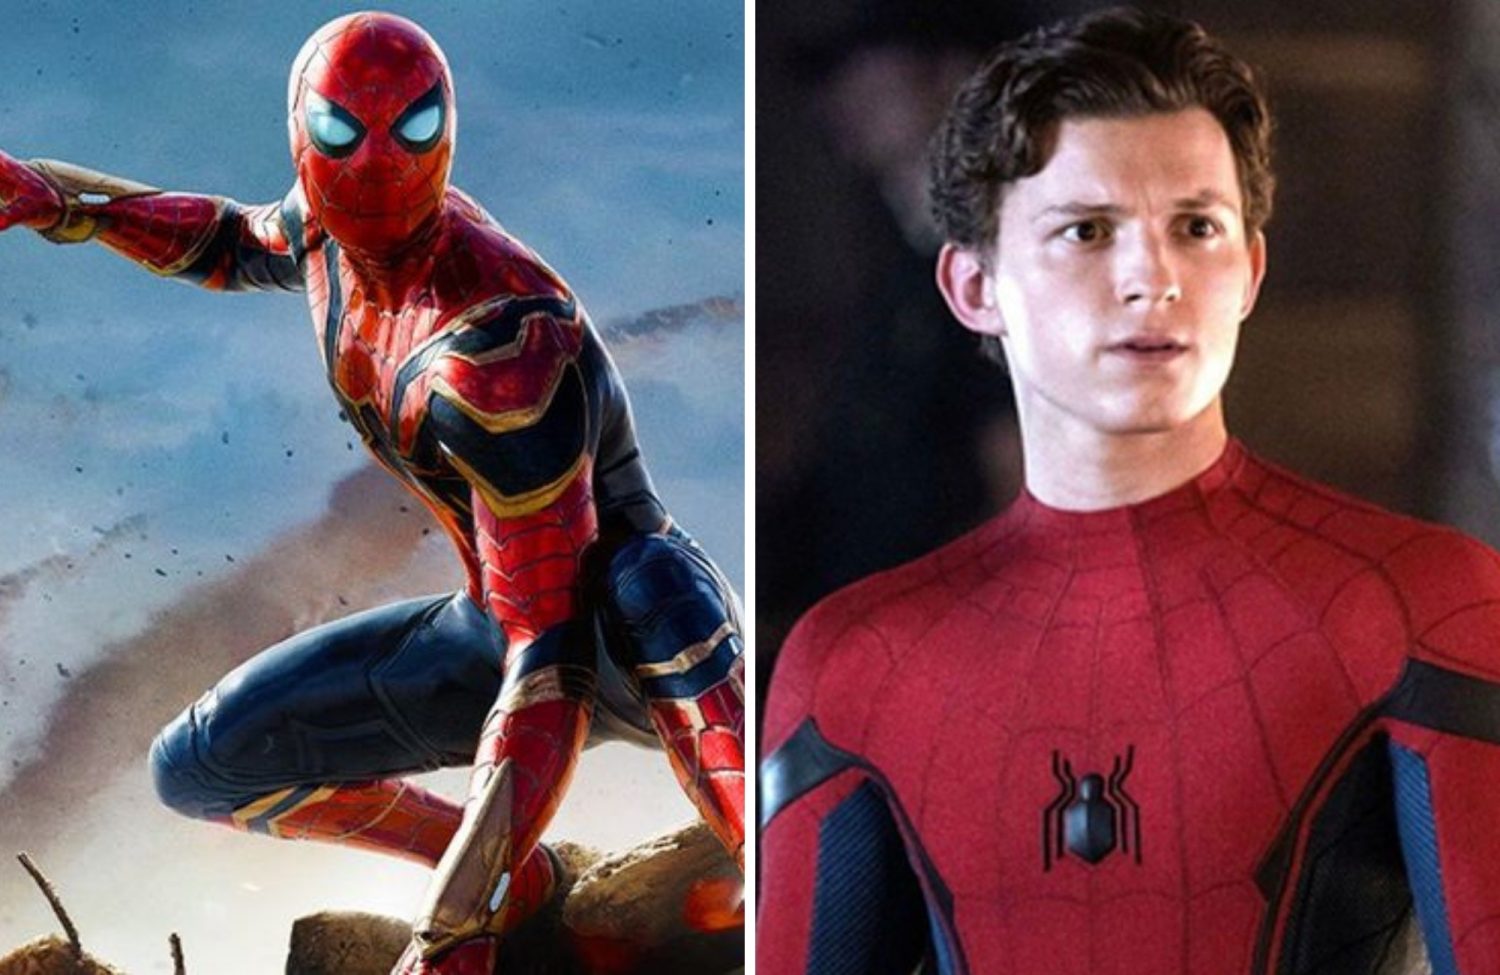 Spider-man: No Way Home Receives Rare Perfect Rotten Tomatoes Score After First Reviews Come In